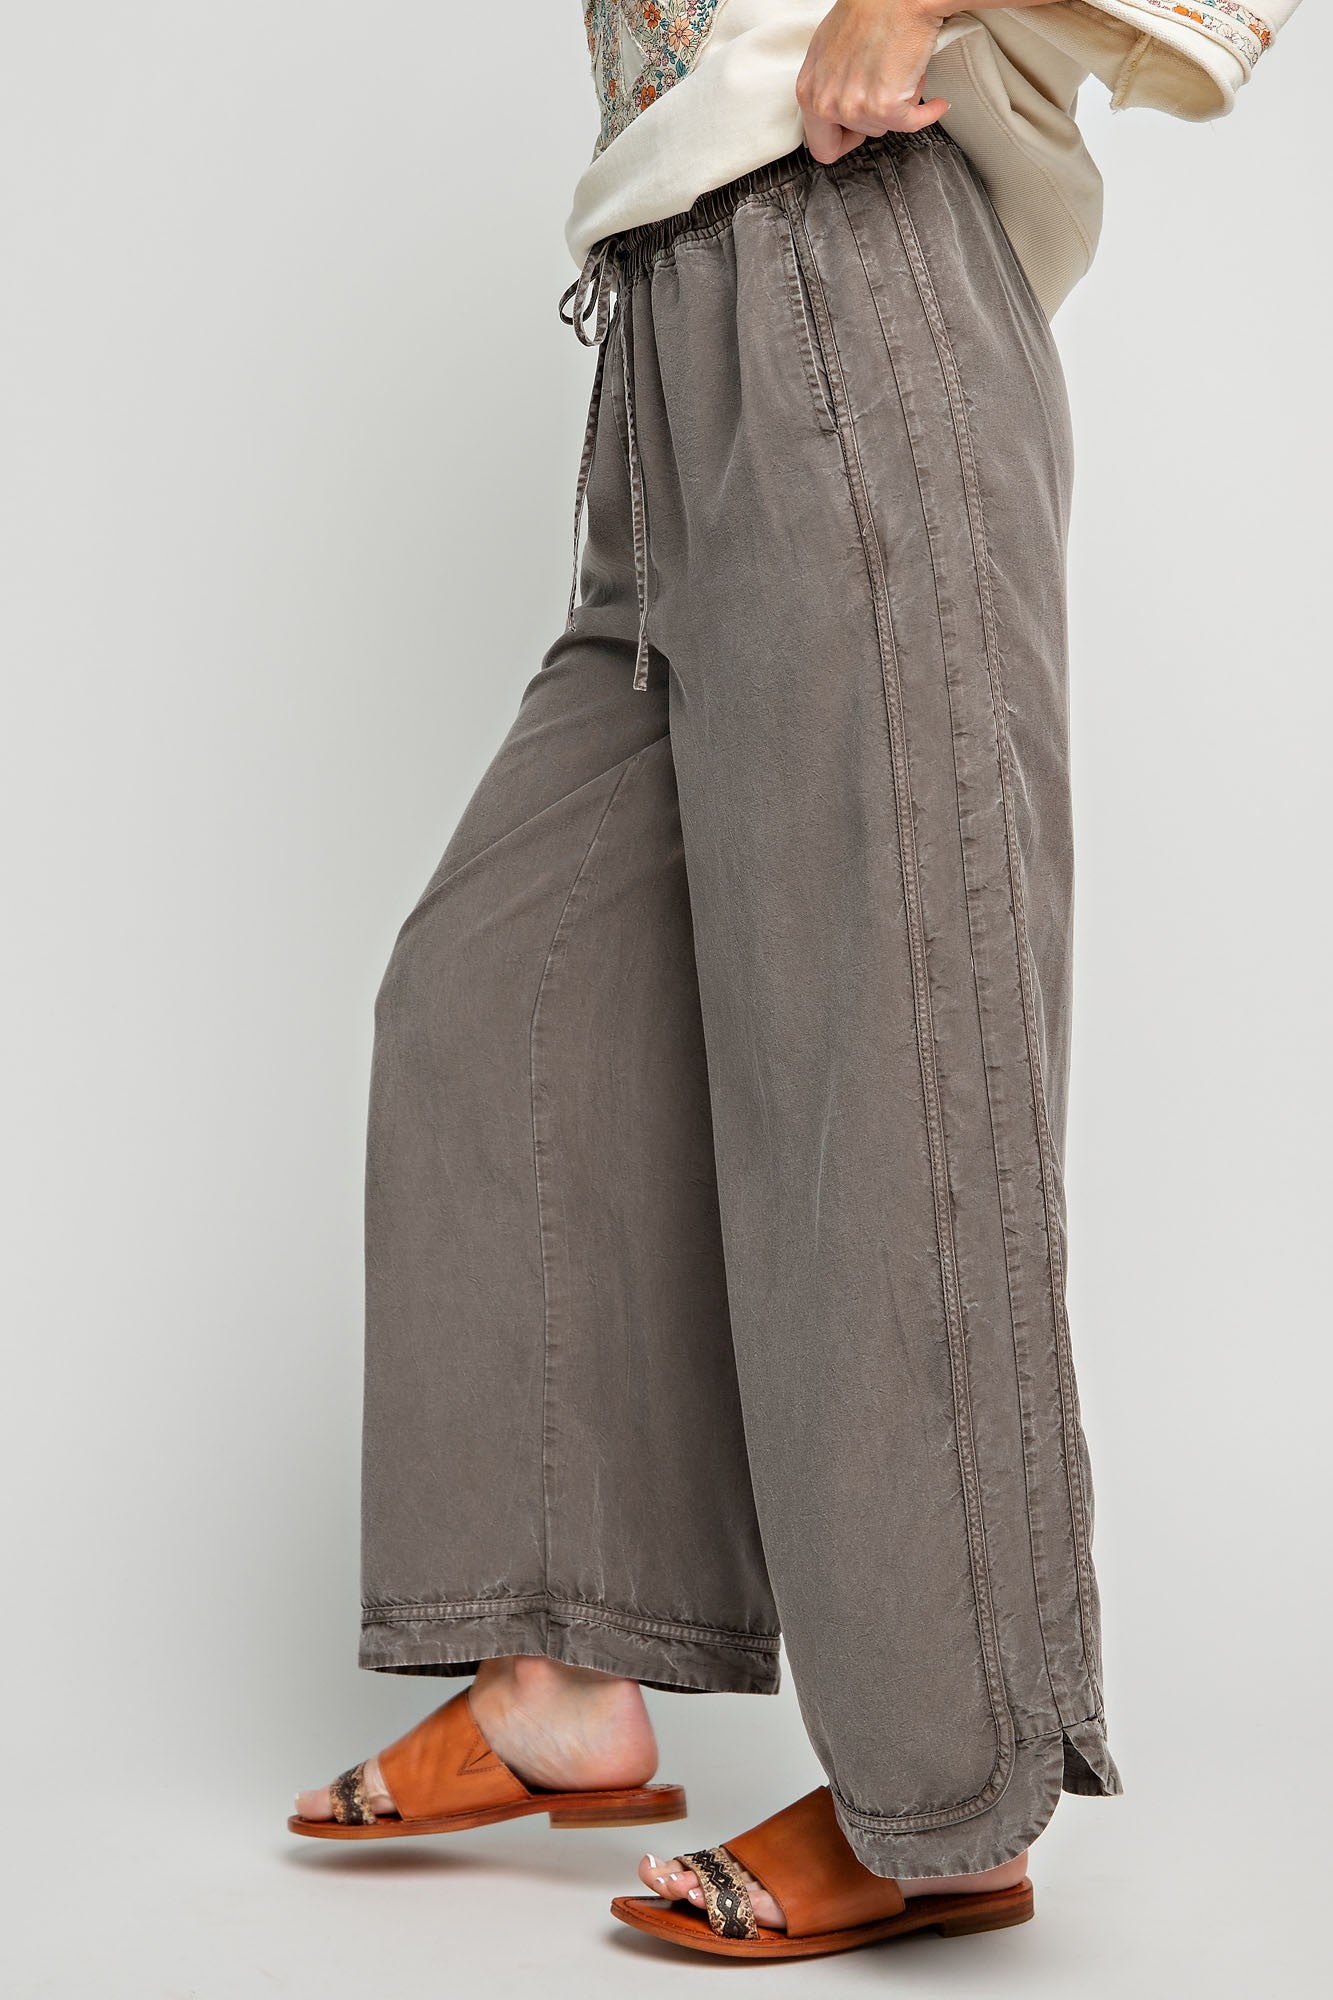 Mineral Washed Soft Twill Wide Leg Pants - Ash